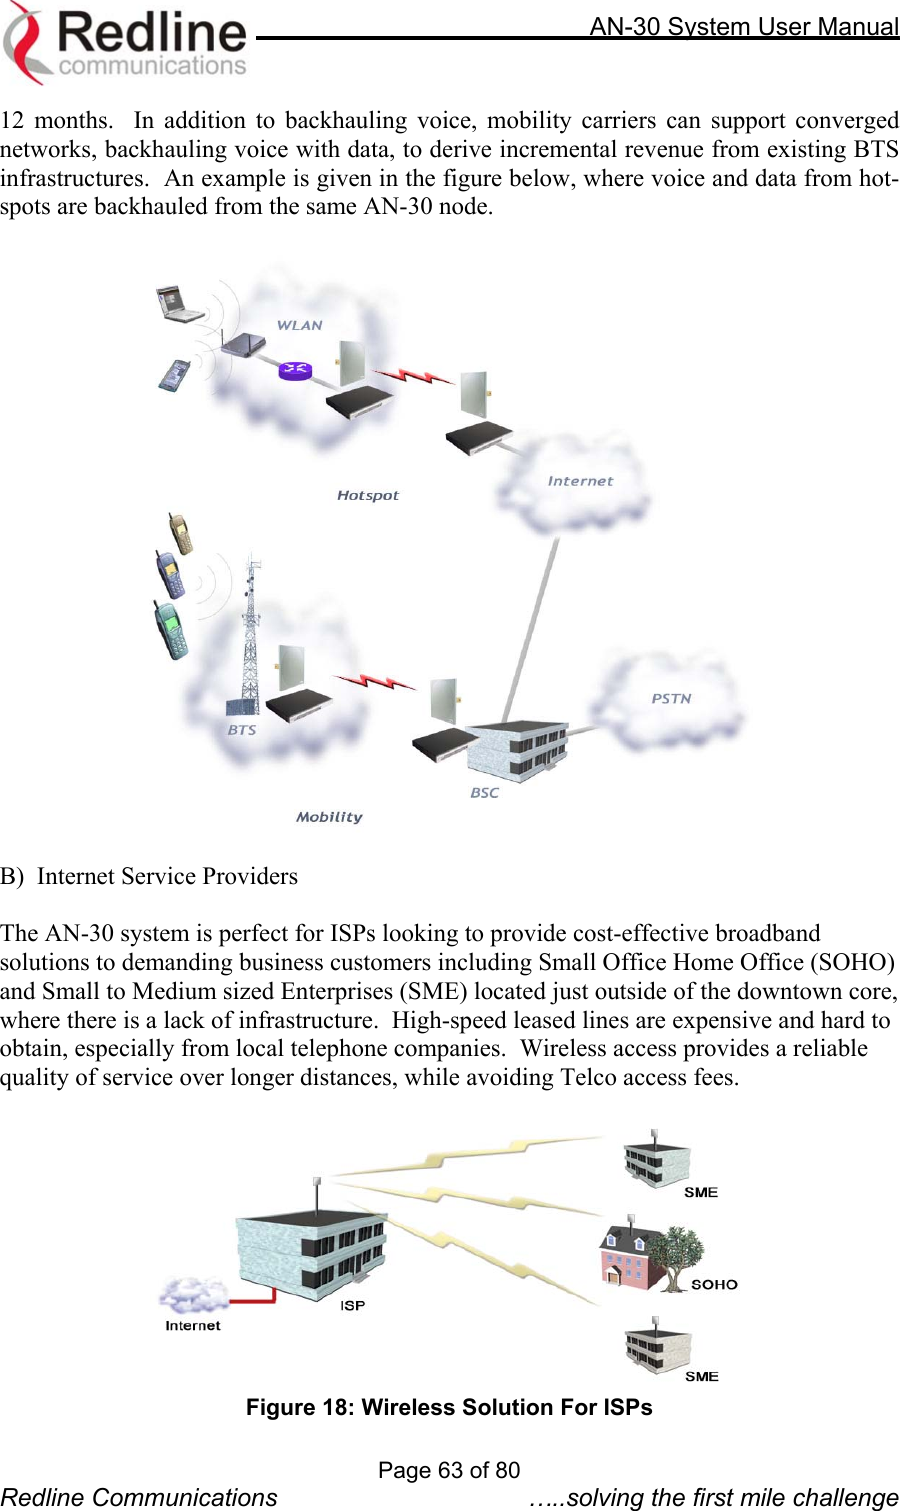     AN-30 System User Manual  12 months.  In addition to backhauling voice, mobility carriers can support converged networks, backhauling voice with data, to derive incremental revenue from existing BTS infrastructures.  An example is given in the figure below, where voice and data from hot-spots are backhauled from the same AN-30 node.    B)  Internet Service Providers  The AN-30 system is perfect for ISPs looking to provide cost-effective broadband solutions to demanding business customers including Small Office Home Office (SOHO) and Small to Medium sized Enterprises (SME) located just outside of the downtown core, where there is a lack of infrastructure.  High-speed leased lines are expensive and hard to obtain, especially from local telephone companies.  Wireless access provides a reliable quality of service over longer distances, while avoiding Telco access fees.     Figure 18: Wireless Solution For ISPs Page 63 of 80 Redline Communications  …..solving the first mile challenge 